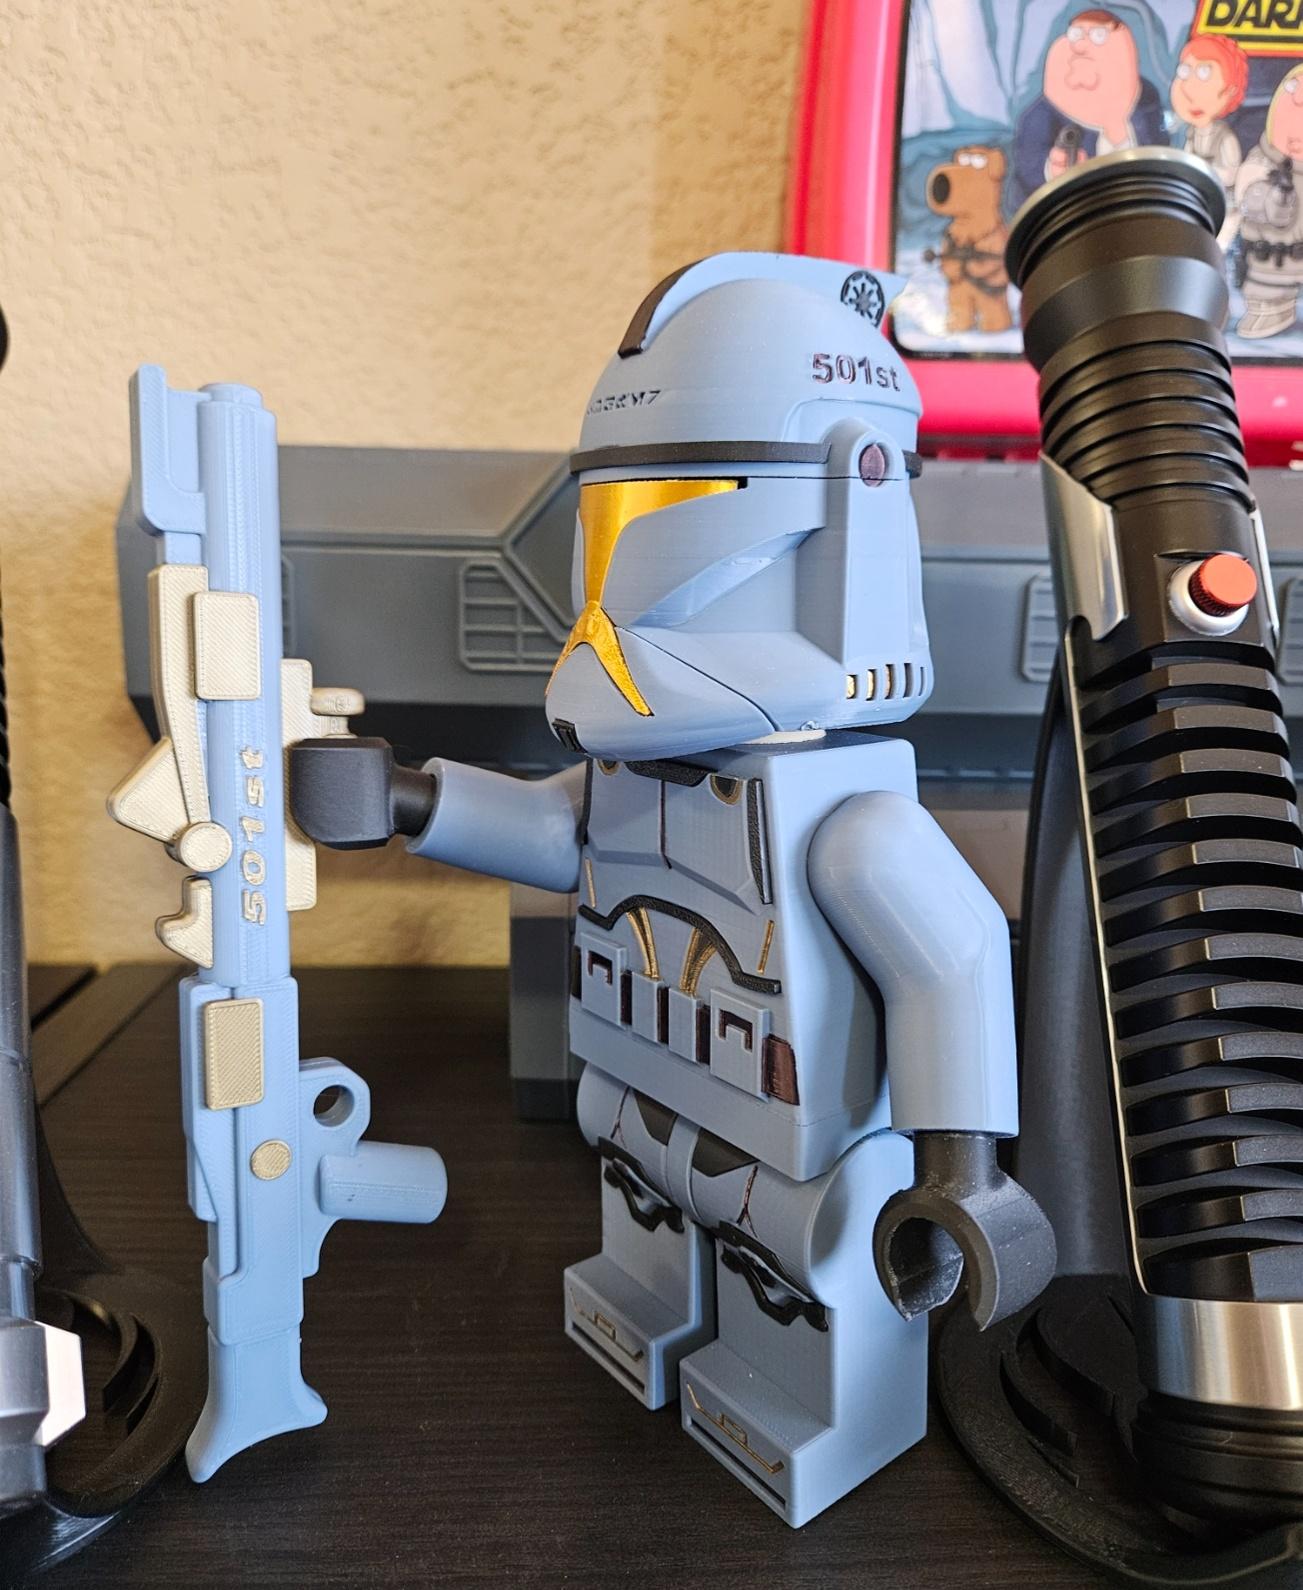 Clone Trooper - Phase I (9 inch brick figure, NO MMU/AMS, NO supports, NO glue) - Great models, even more fun to print. I modded mine into a "501st Senate Trooper". Granted Senate Guards aren't troopers or in the 501st. And, similar stuff for the 501st Clone Troopers. Just a fun idea I came up with. - 3d model